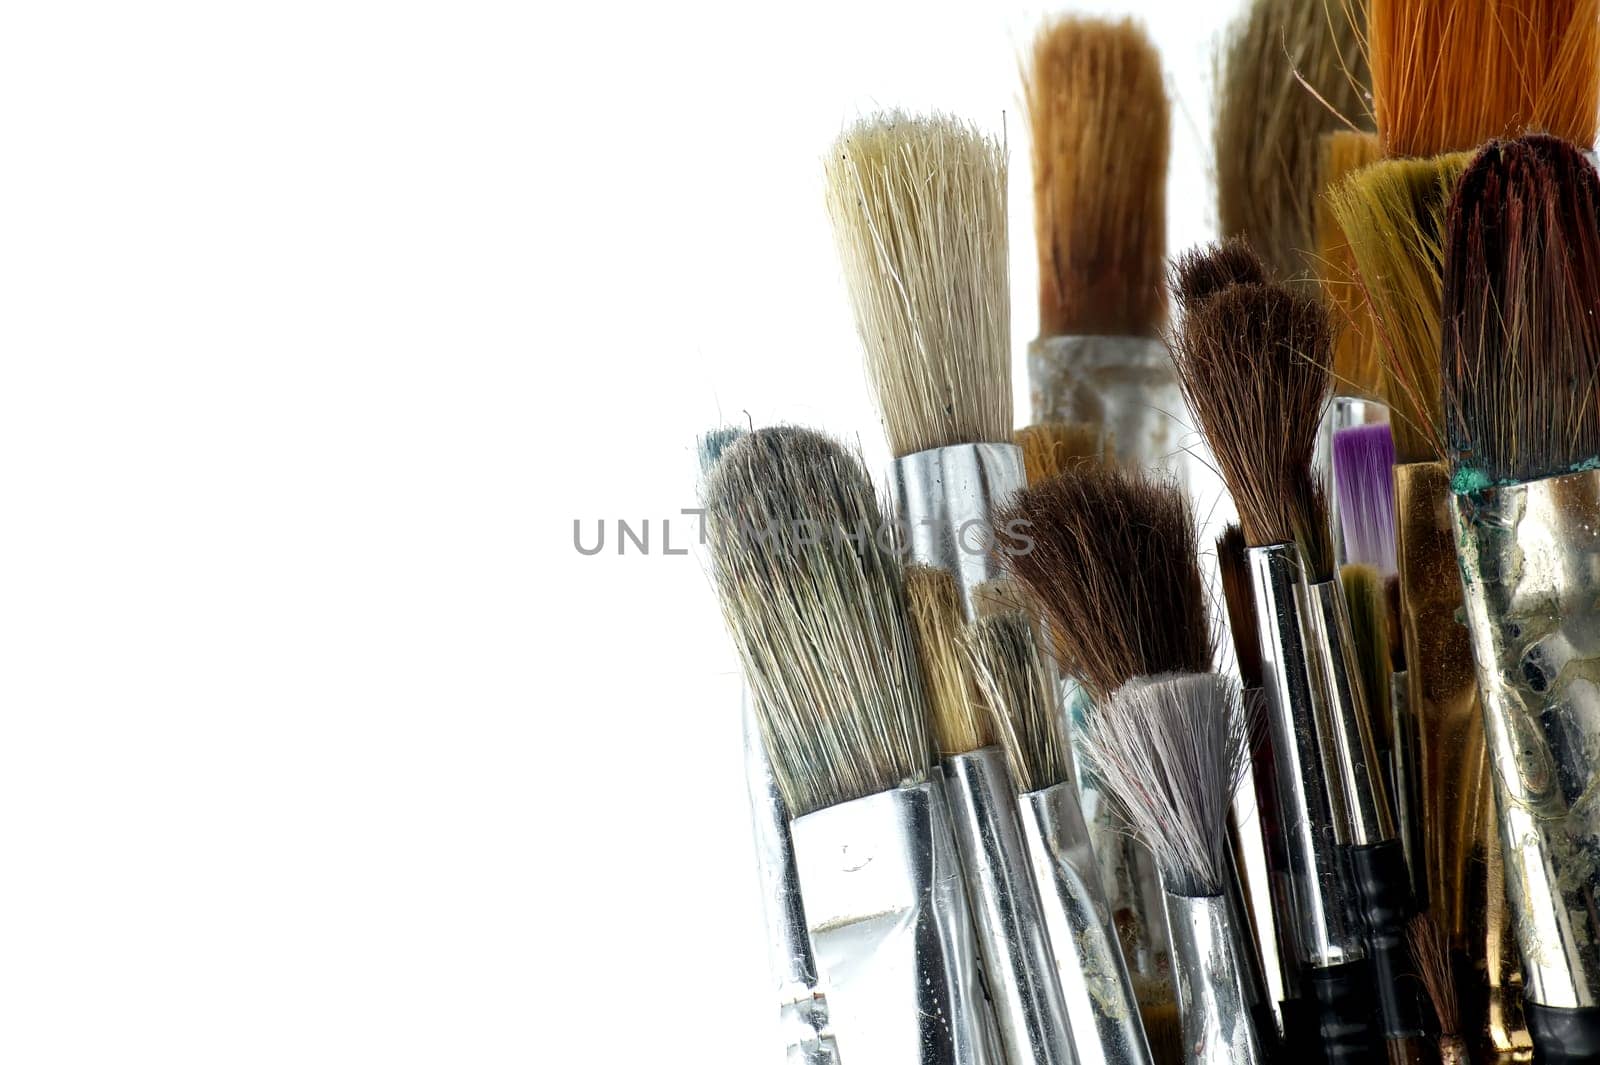 Array of paintbrushes of different sizes and colors isolated on white background